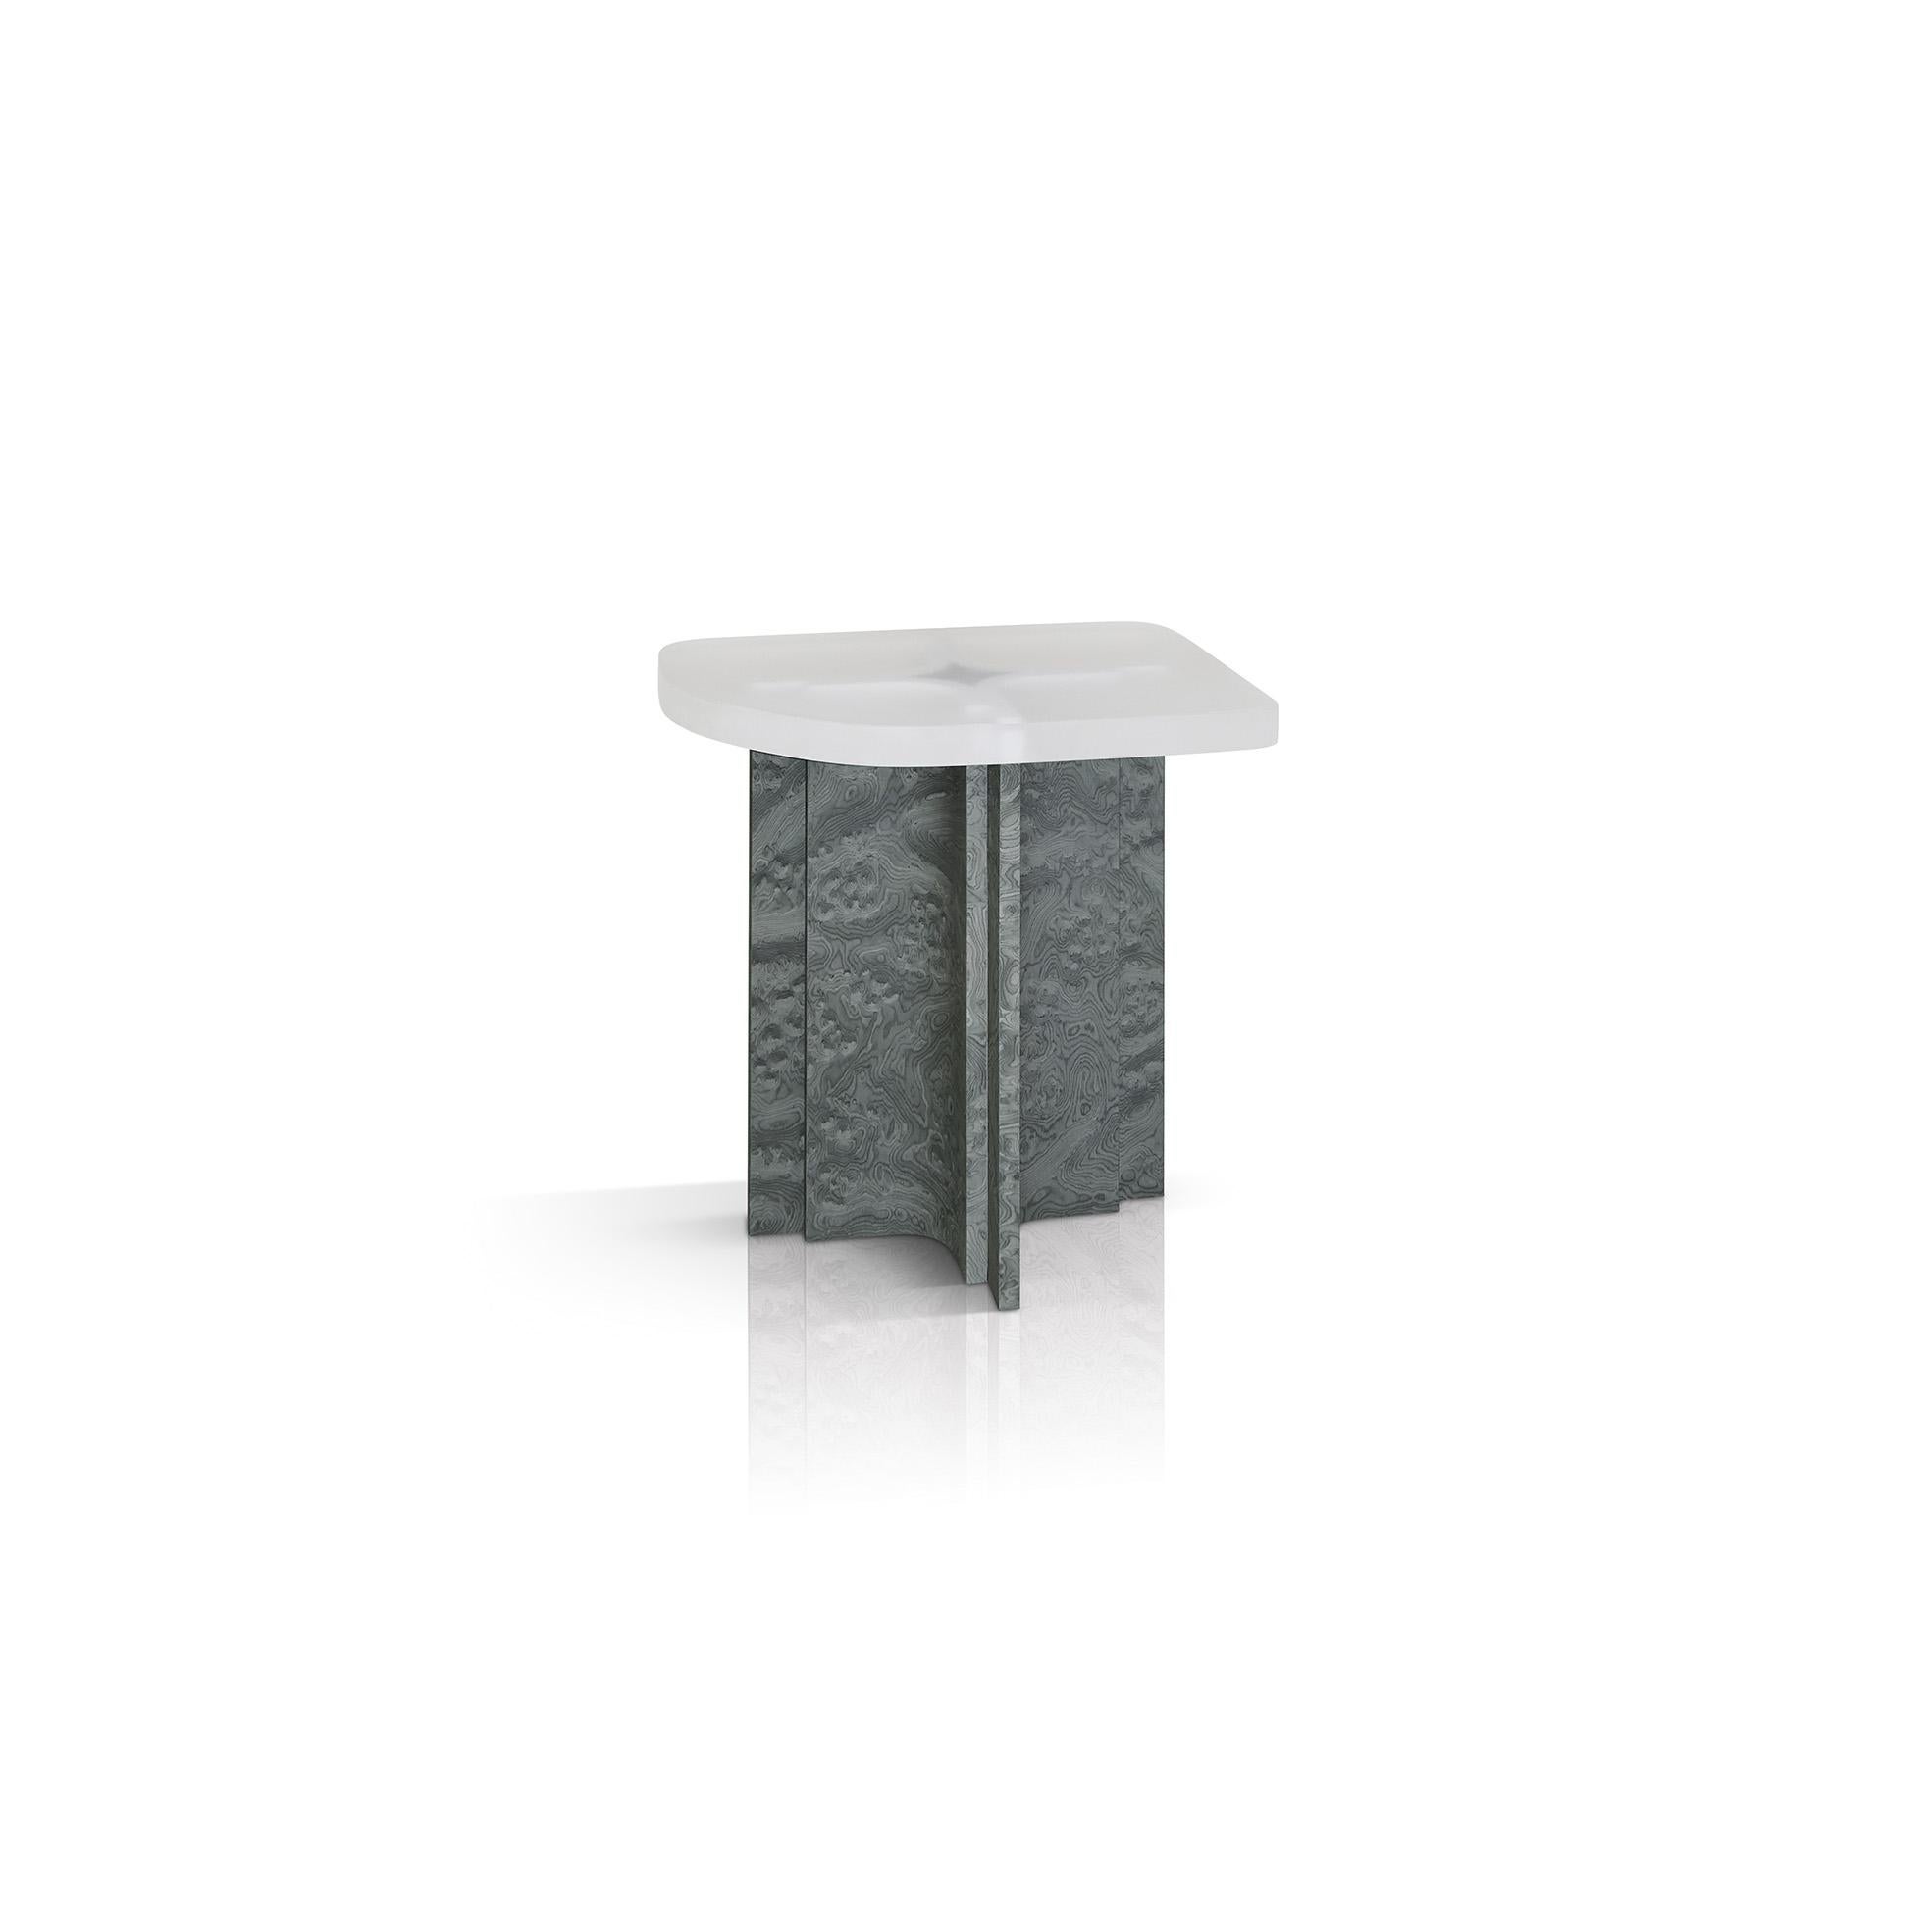 The Fossil tables are inspired by an unusually combination of archaeology and Mies van der Rohe’s columns in the Barcelona Pavillion. As one lounges around the Fossil tables, the supporting structure is exposed through the translucent resin top -